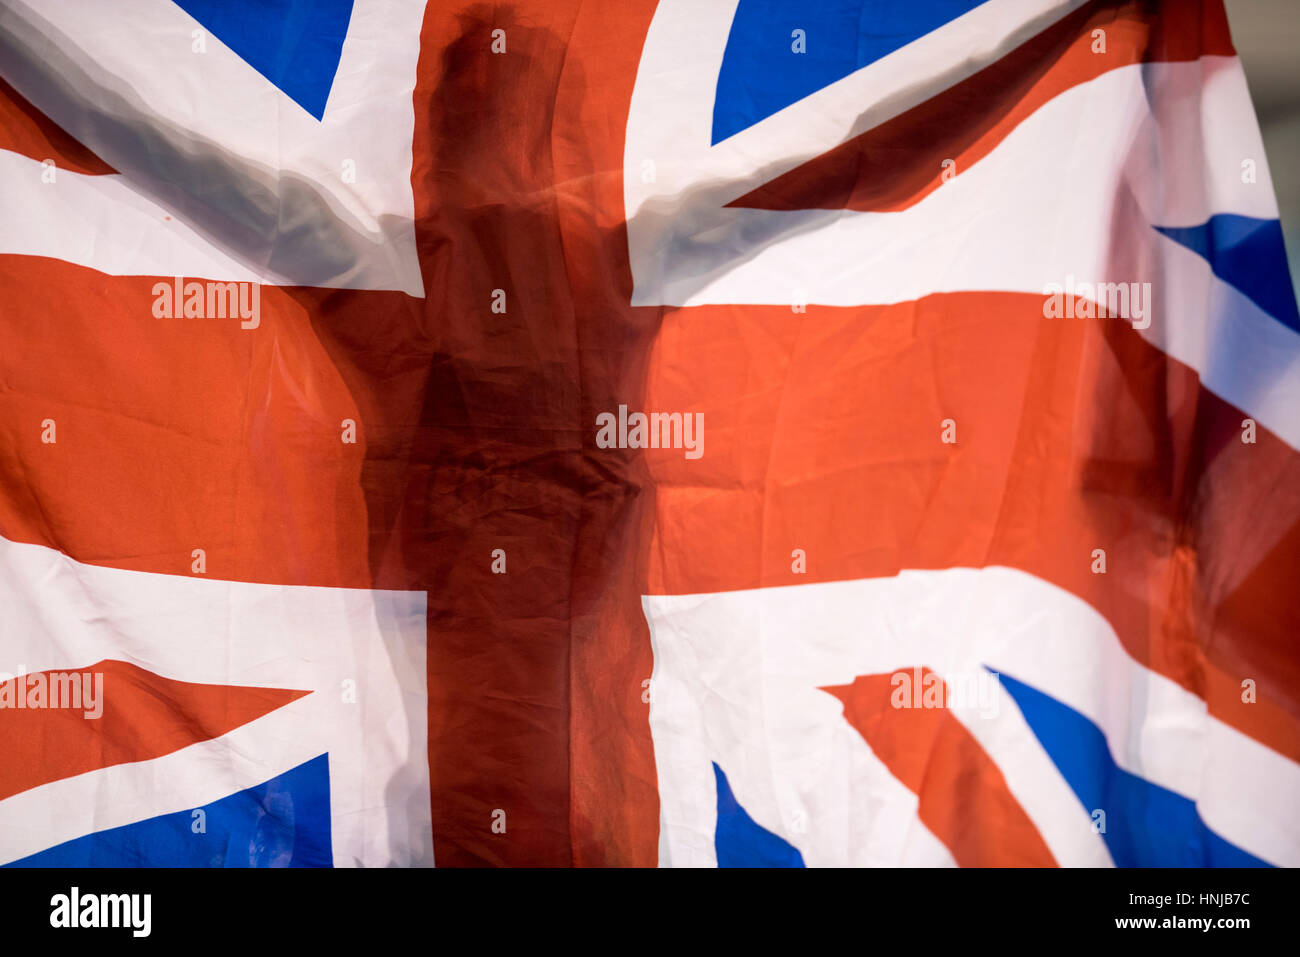 An athlete is silhouetted in a Union Flag at the British Athletics Indoor Team Trials at the English Institute of Sport, Sheffield, United Kingdom, on Stock Photo